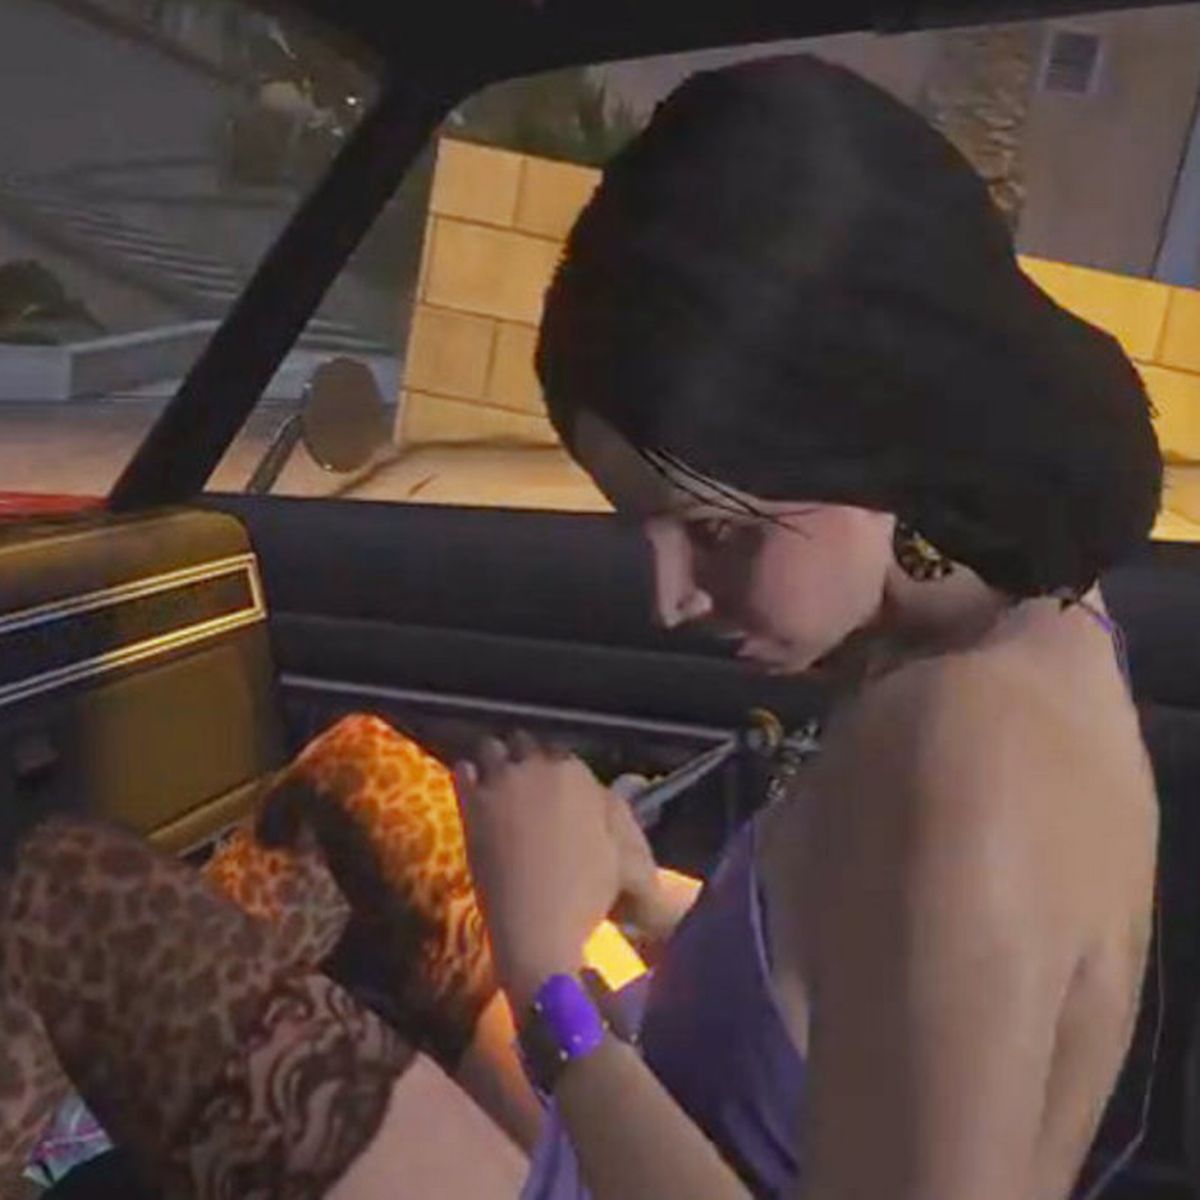 clarissa veloria add photo how to have sex in gta 5